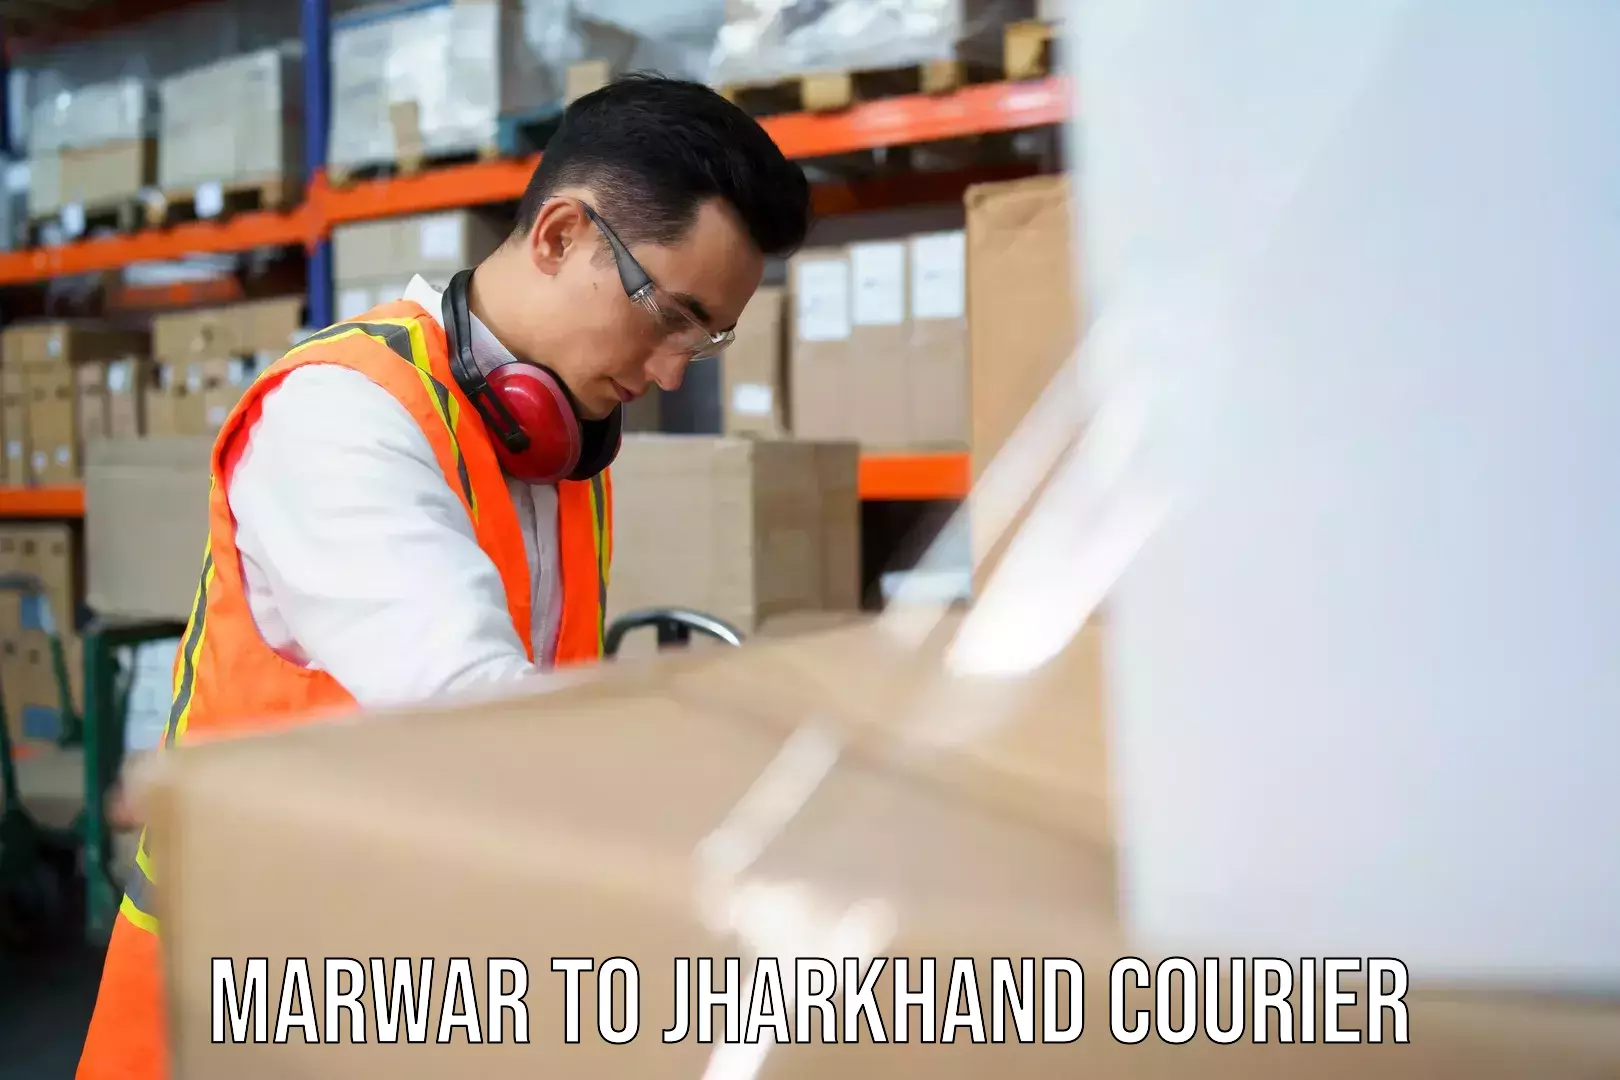 Multi-service courier options Marwar to Dhanbad